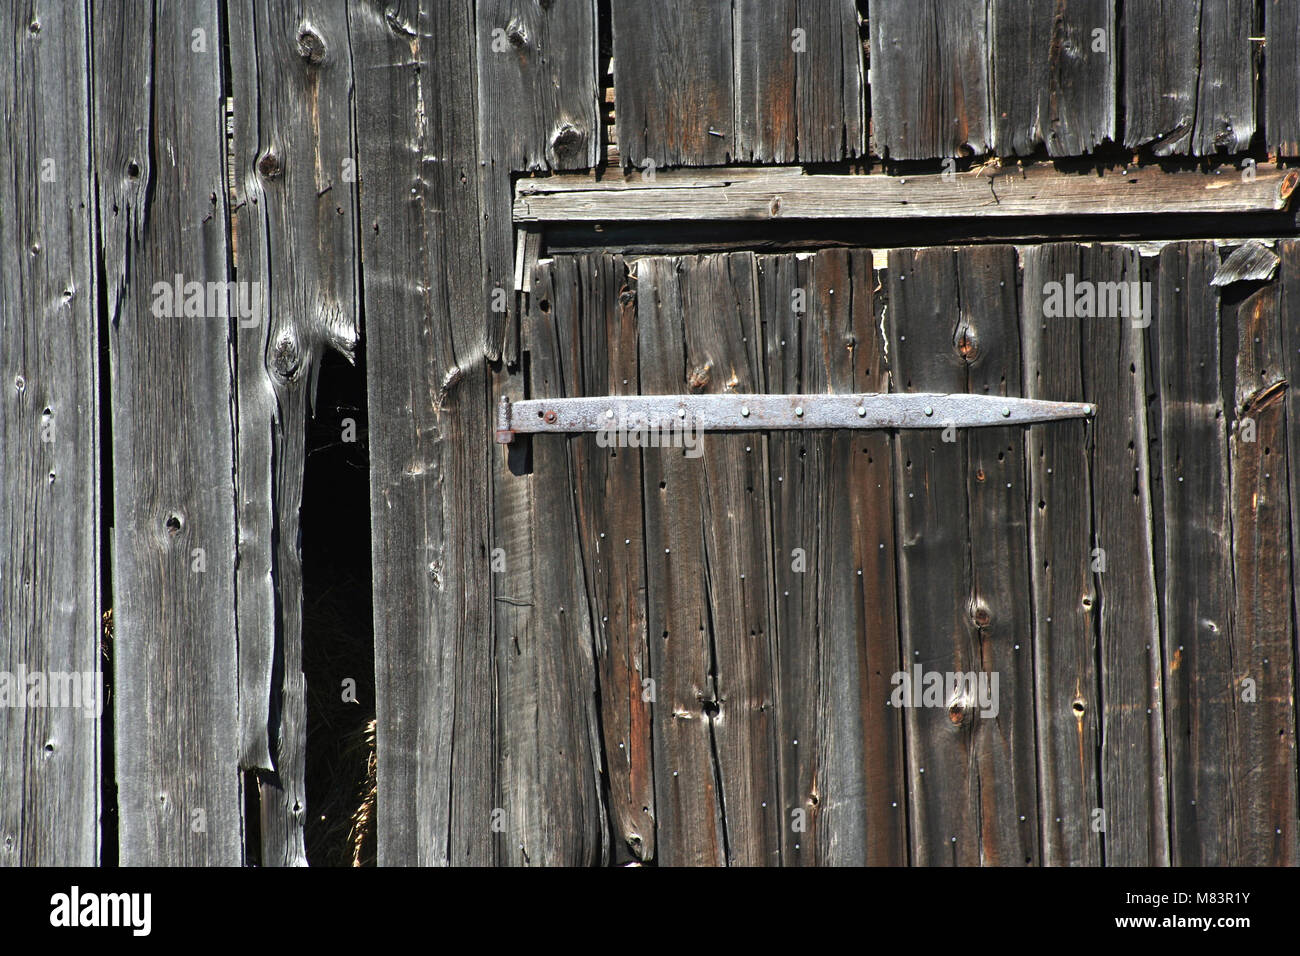 An Old wooden barn door and hinge Stock Photo